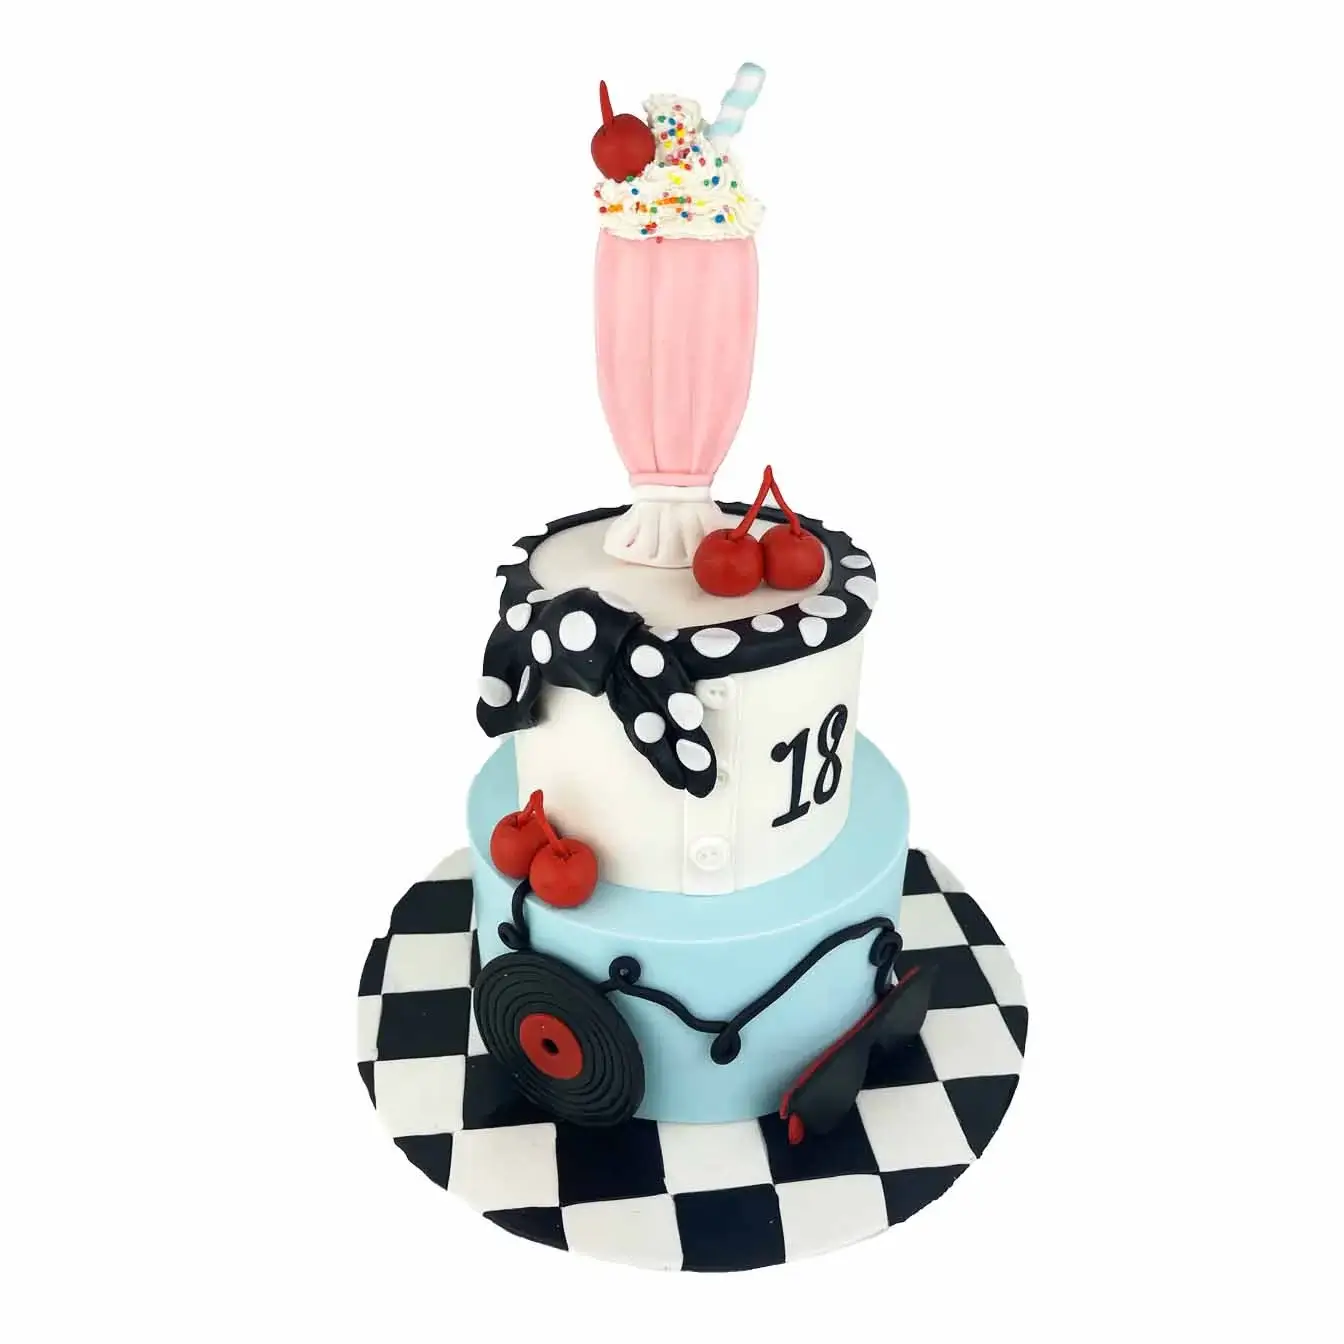 Retro Diner Delight Cake - Two-tier cake adorned with retro diner elements including milkshake, cherries, necktie, sunglasses, vinyl record, and diner-style iced board, perfect for a nostalgic celebration.